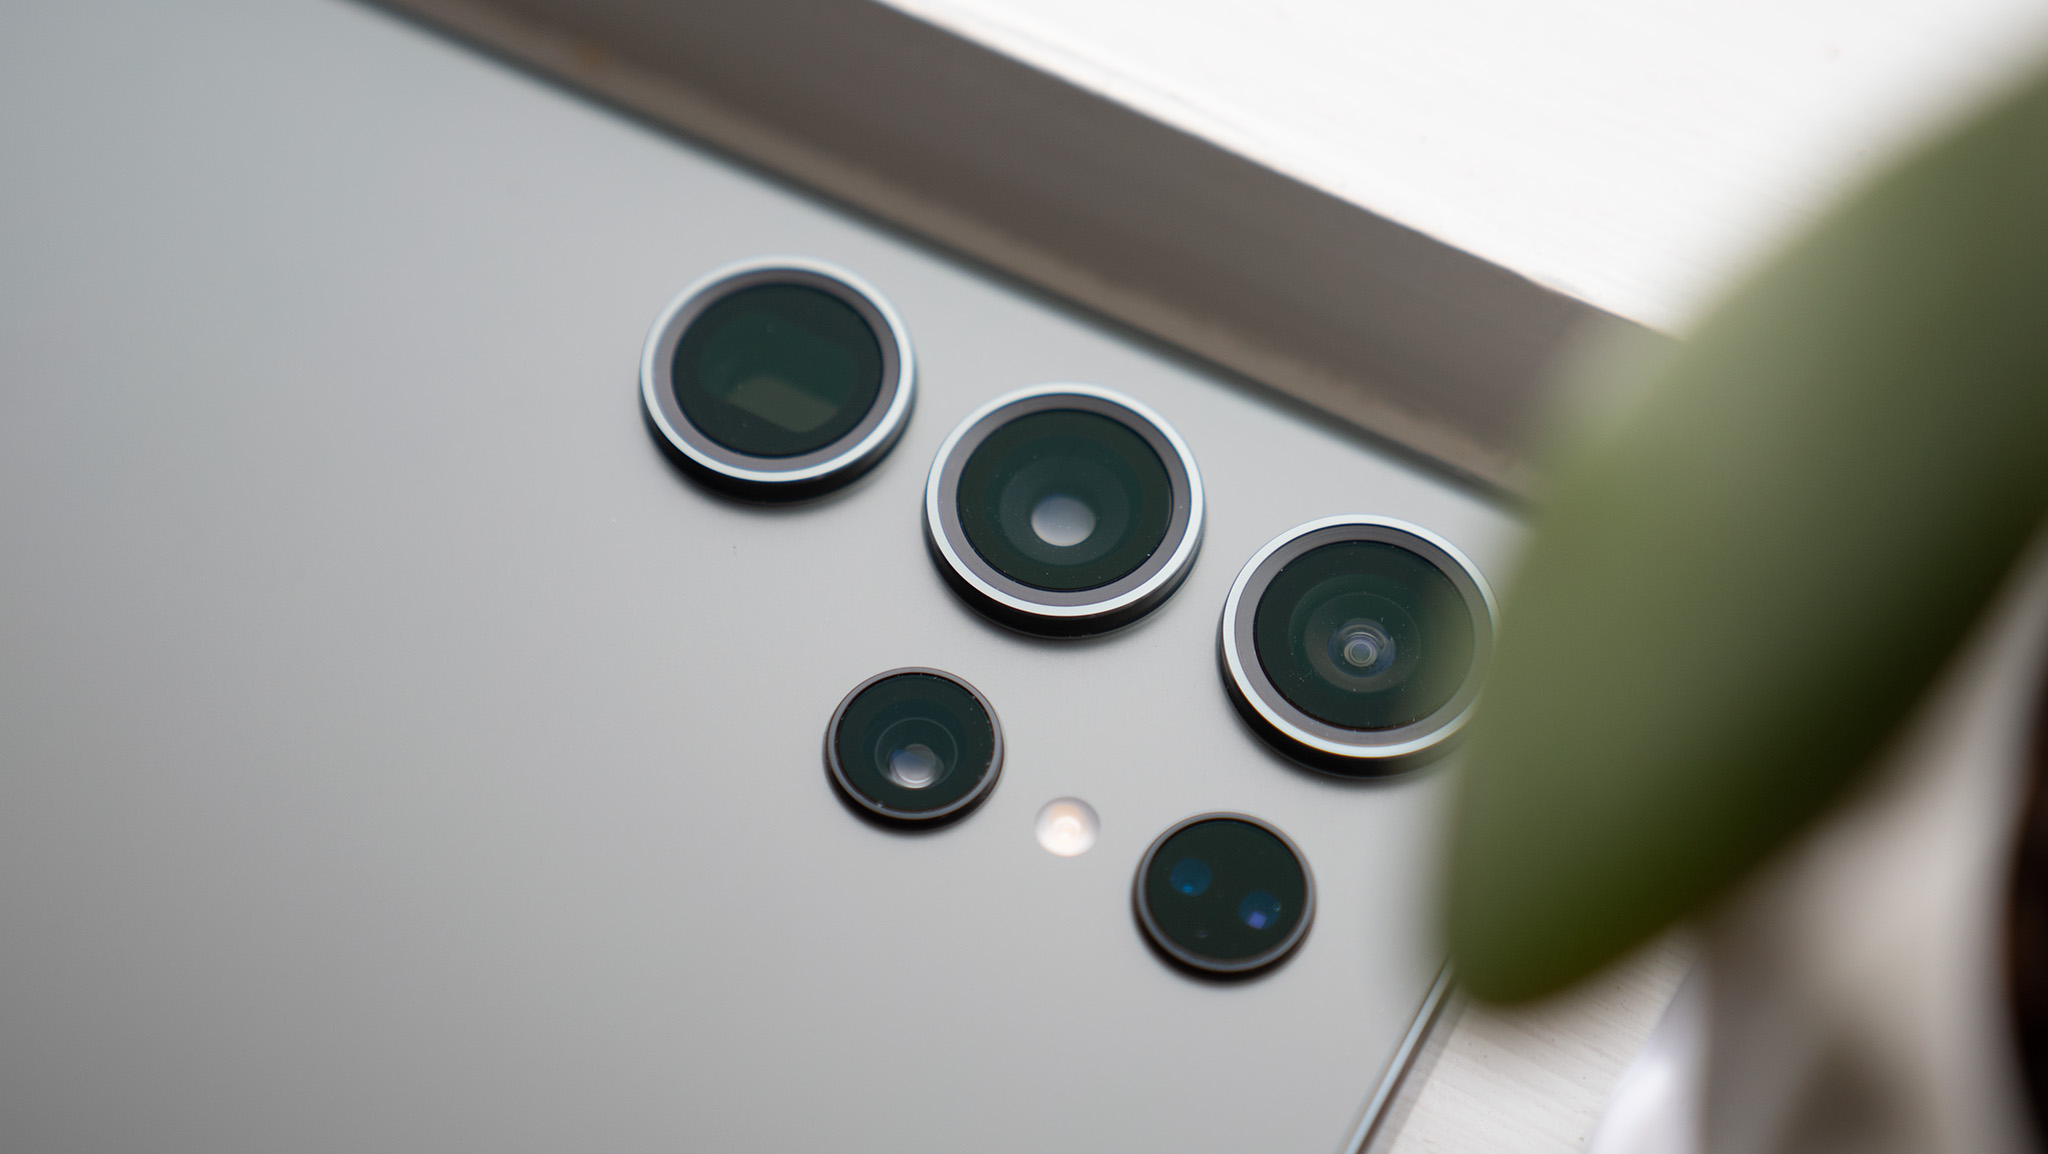 The salient camera modules of the Samsung Galaxy S23 Ultra